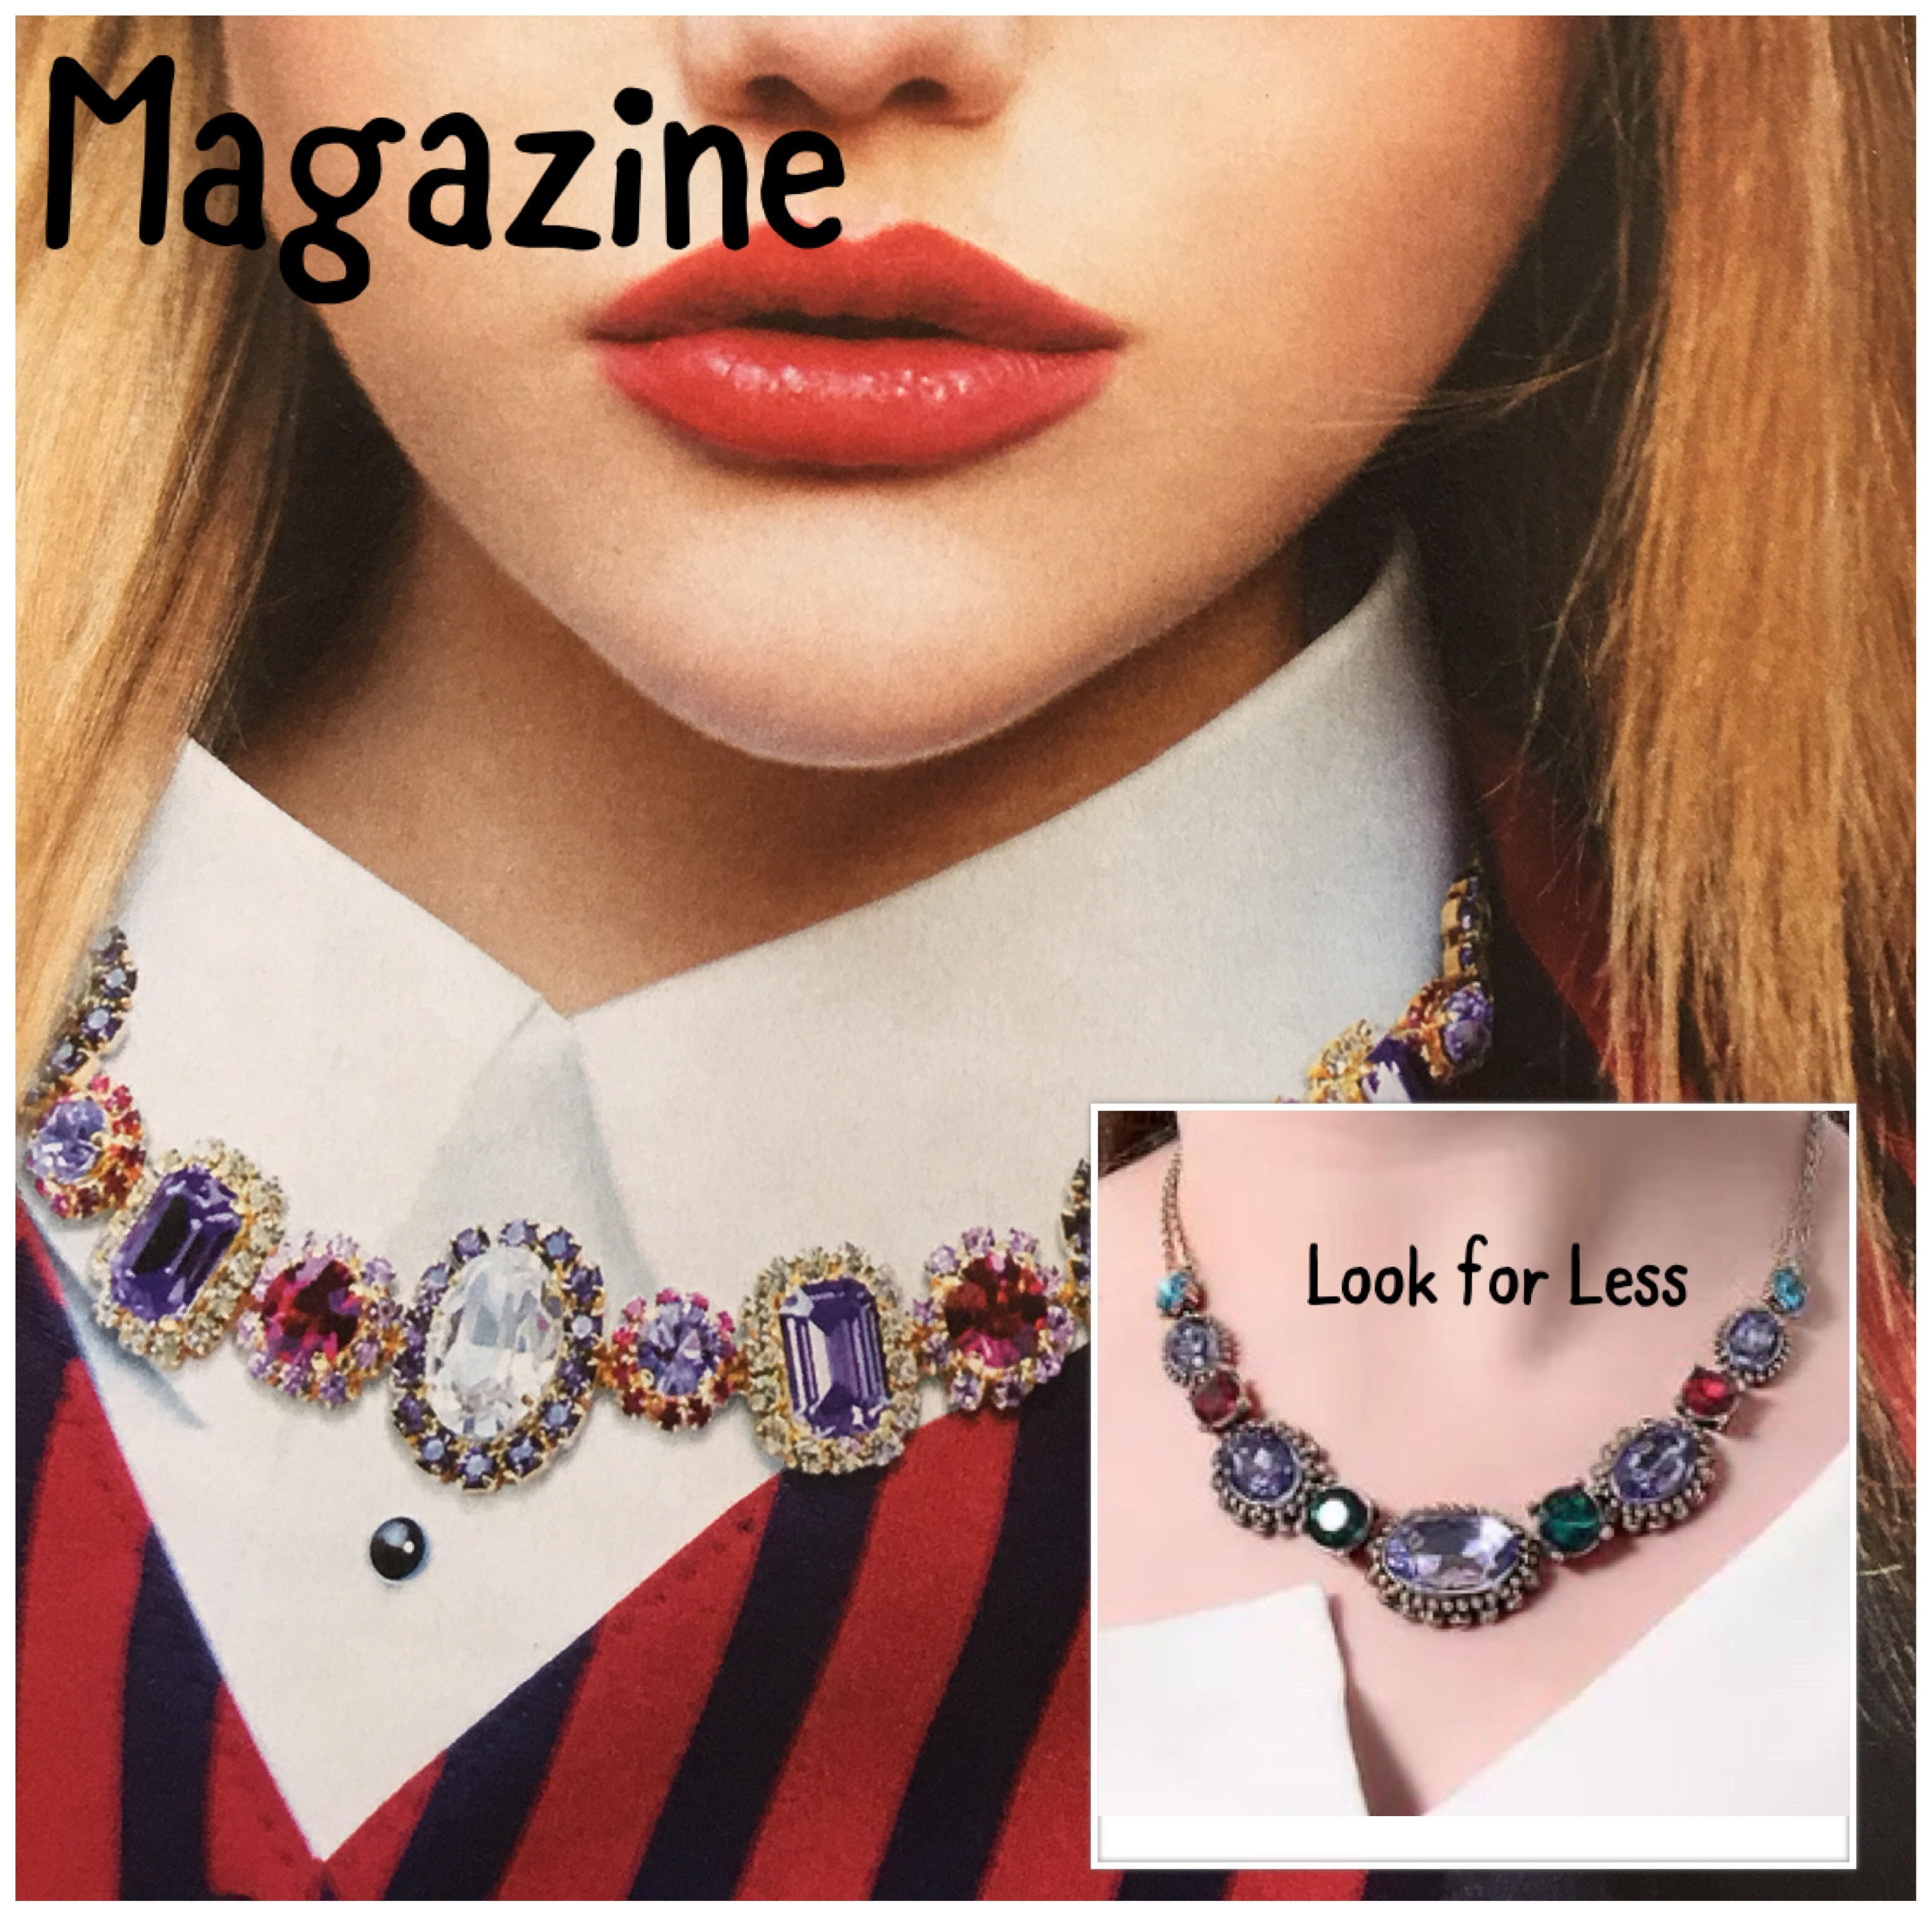  Dolce & Gabbana look for less necklace 